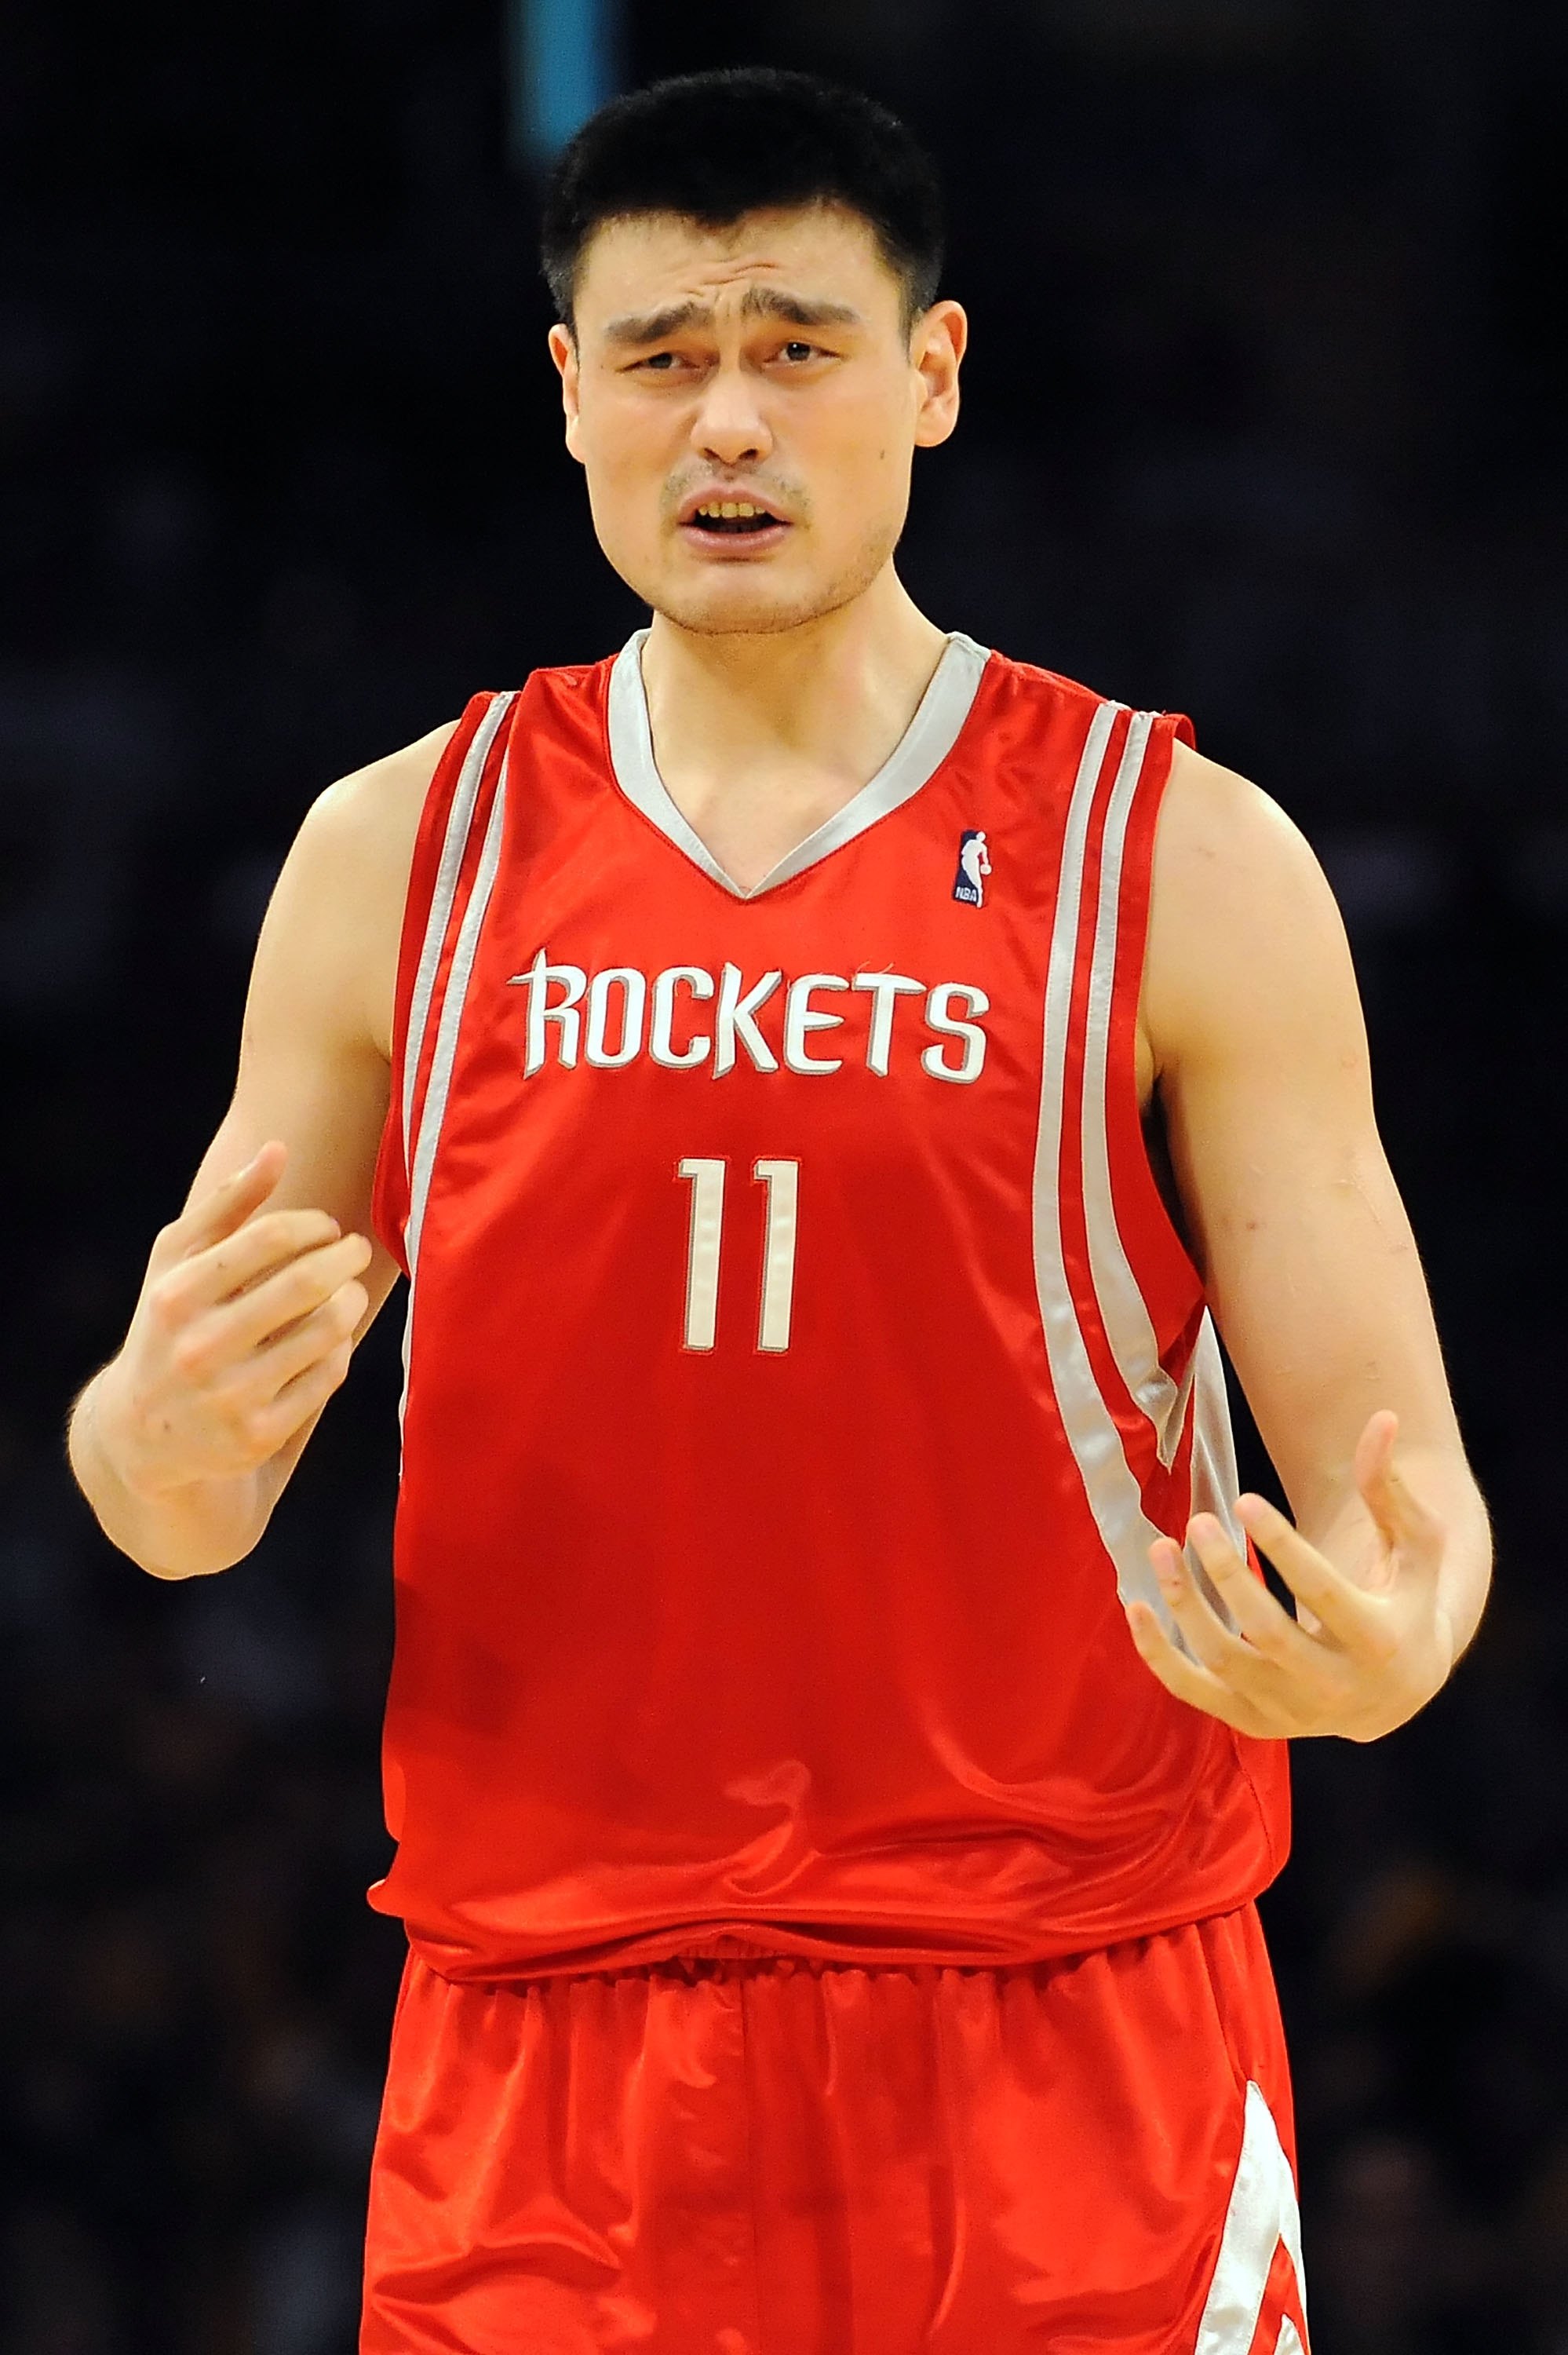 LOS ANGELES, CA - MAY 06:  Yao Ming #11 of the Houston Rockets reacts to a foul called on him in the second quarter against the Los Angeles Lakers in Game Two of the Western Conference Semifinals during the 2009 NBA Playoffs at Staples Center on May 6, 20